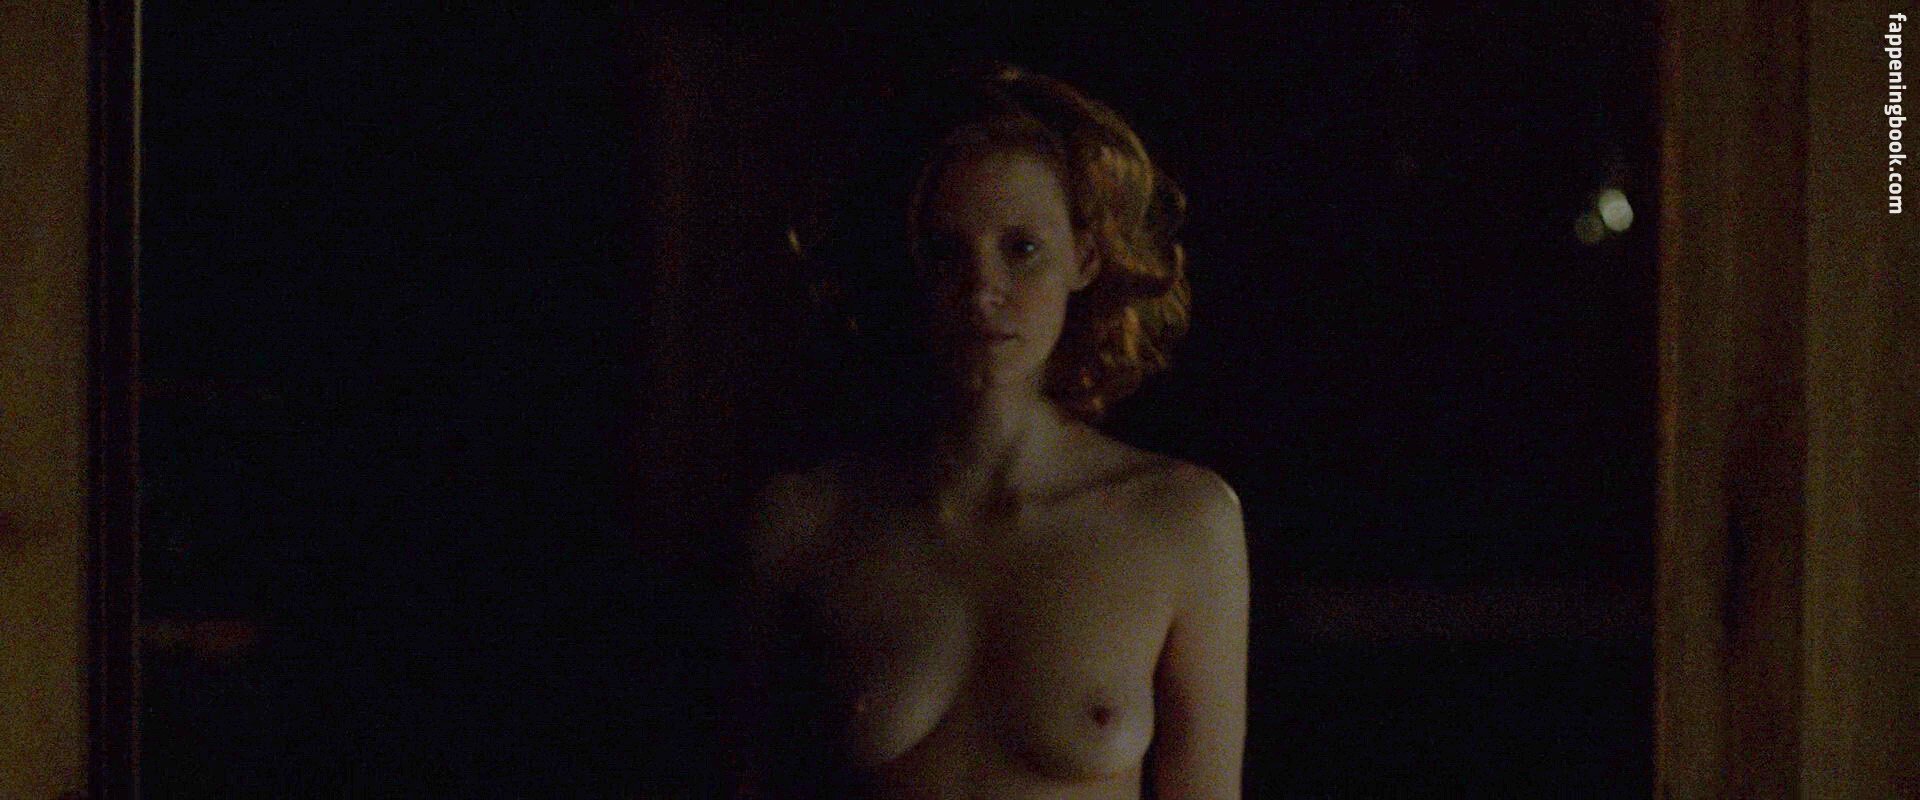 Chastain fappening jessica Redheaded Actress. 